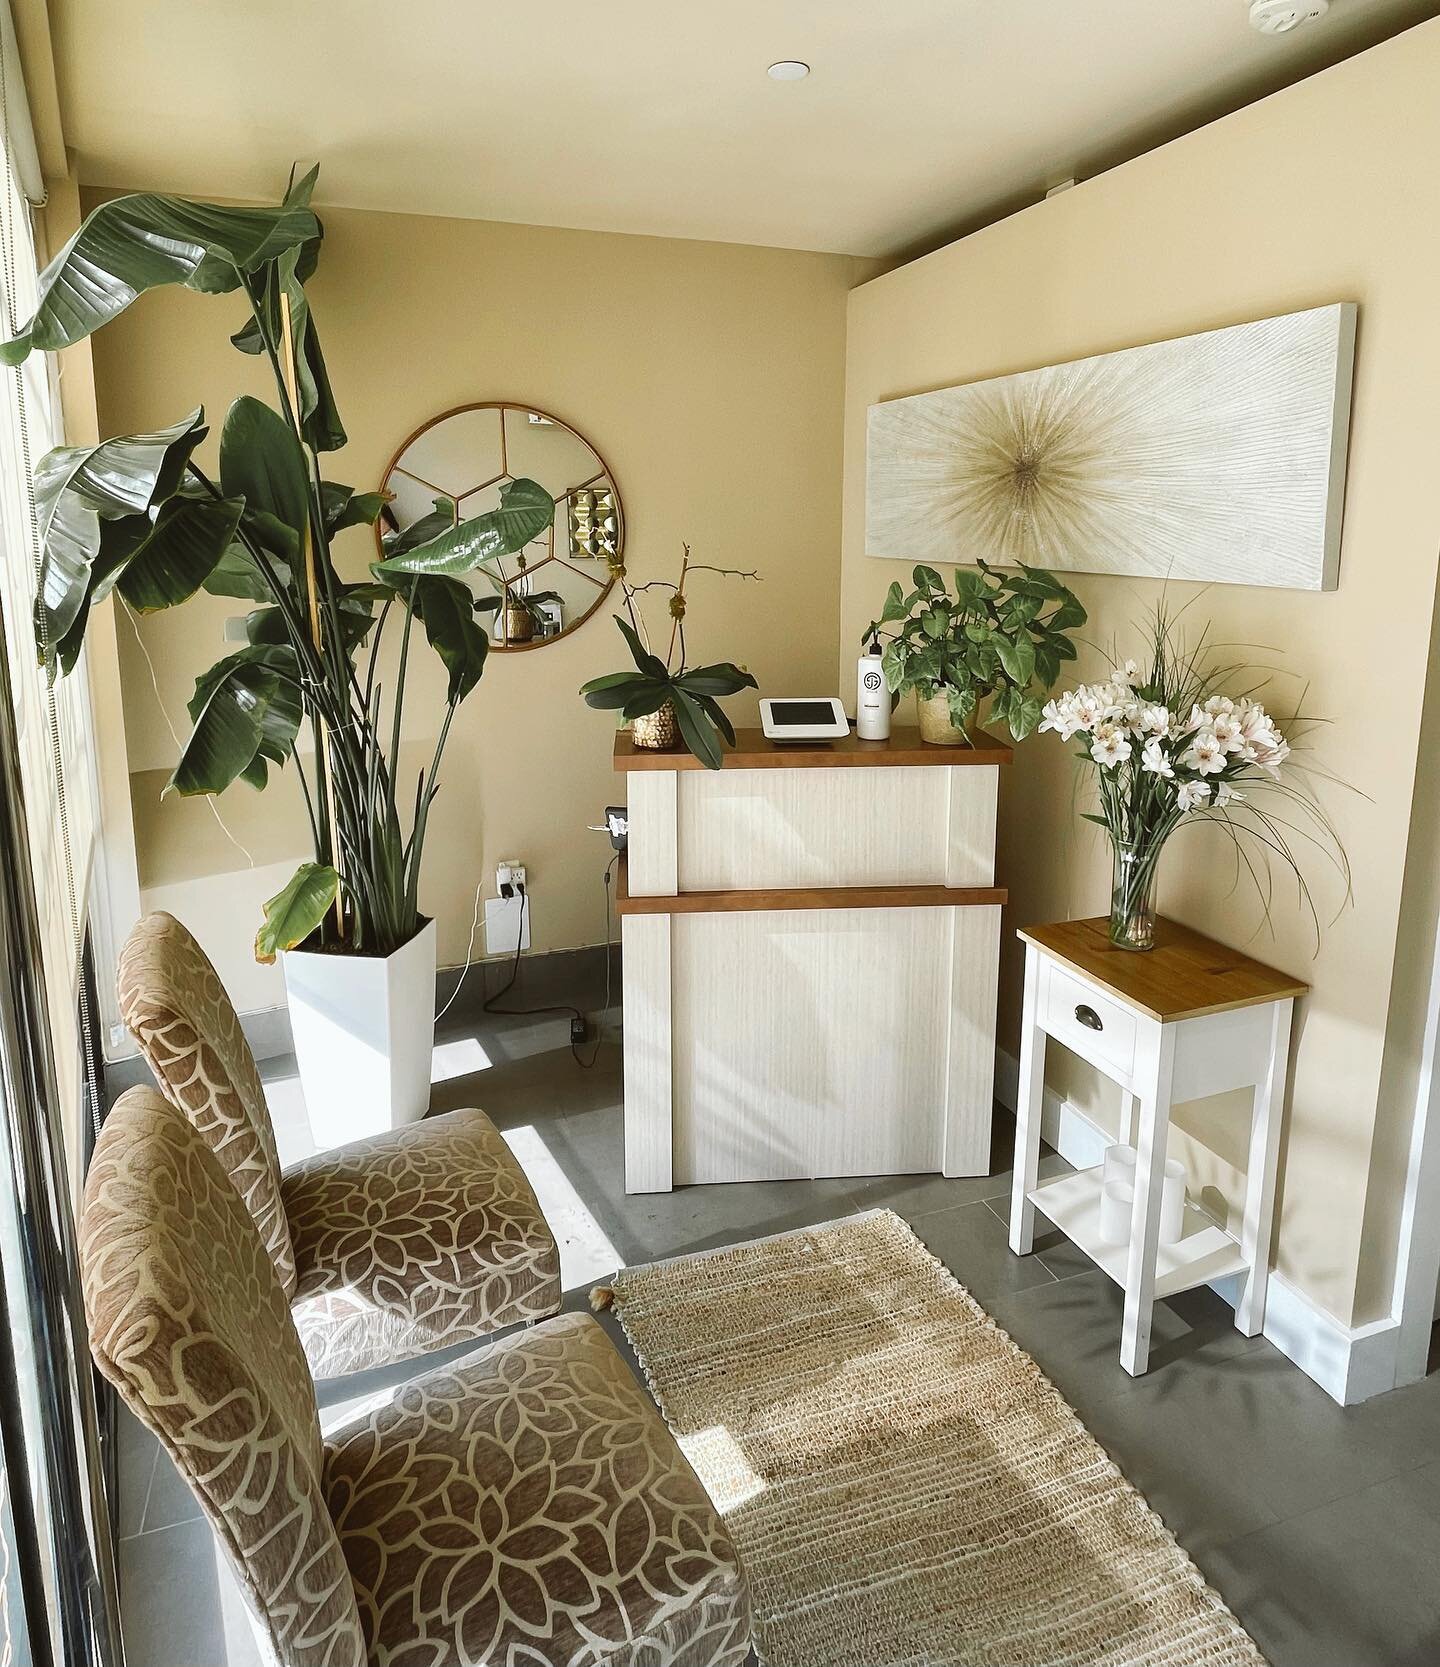 Our studio is about more than just delivering you great spray tans. This space was personally built on a lot more than that! 
We created this space as a way for our clients to come in and feel right at home (hence our name Glow House). 
This is a spa